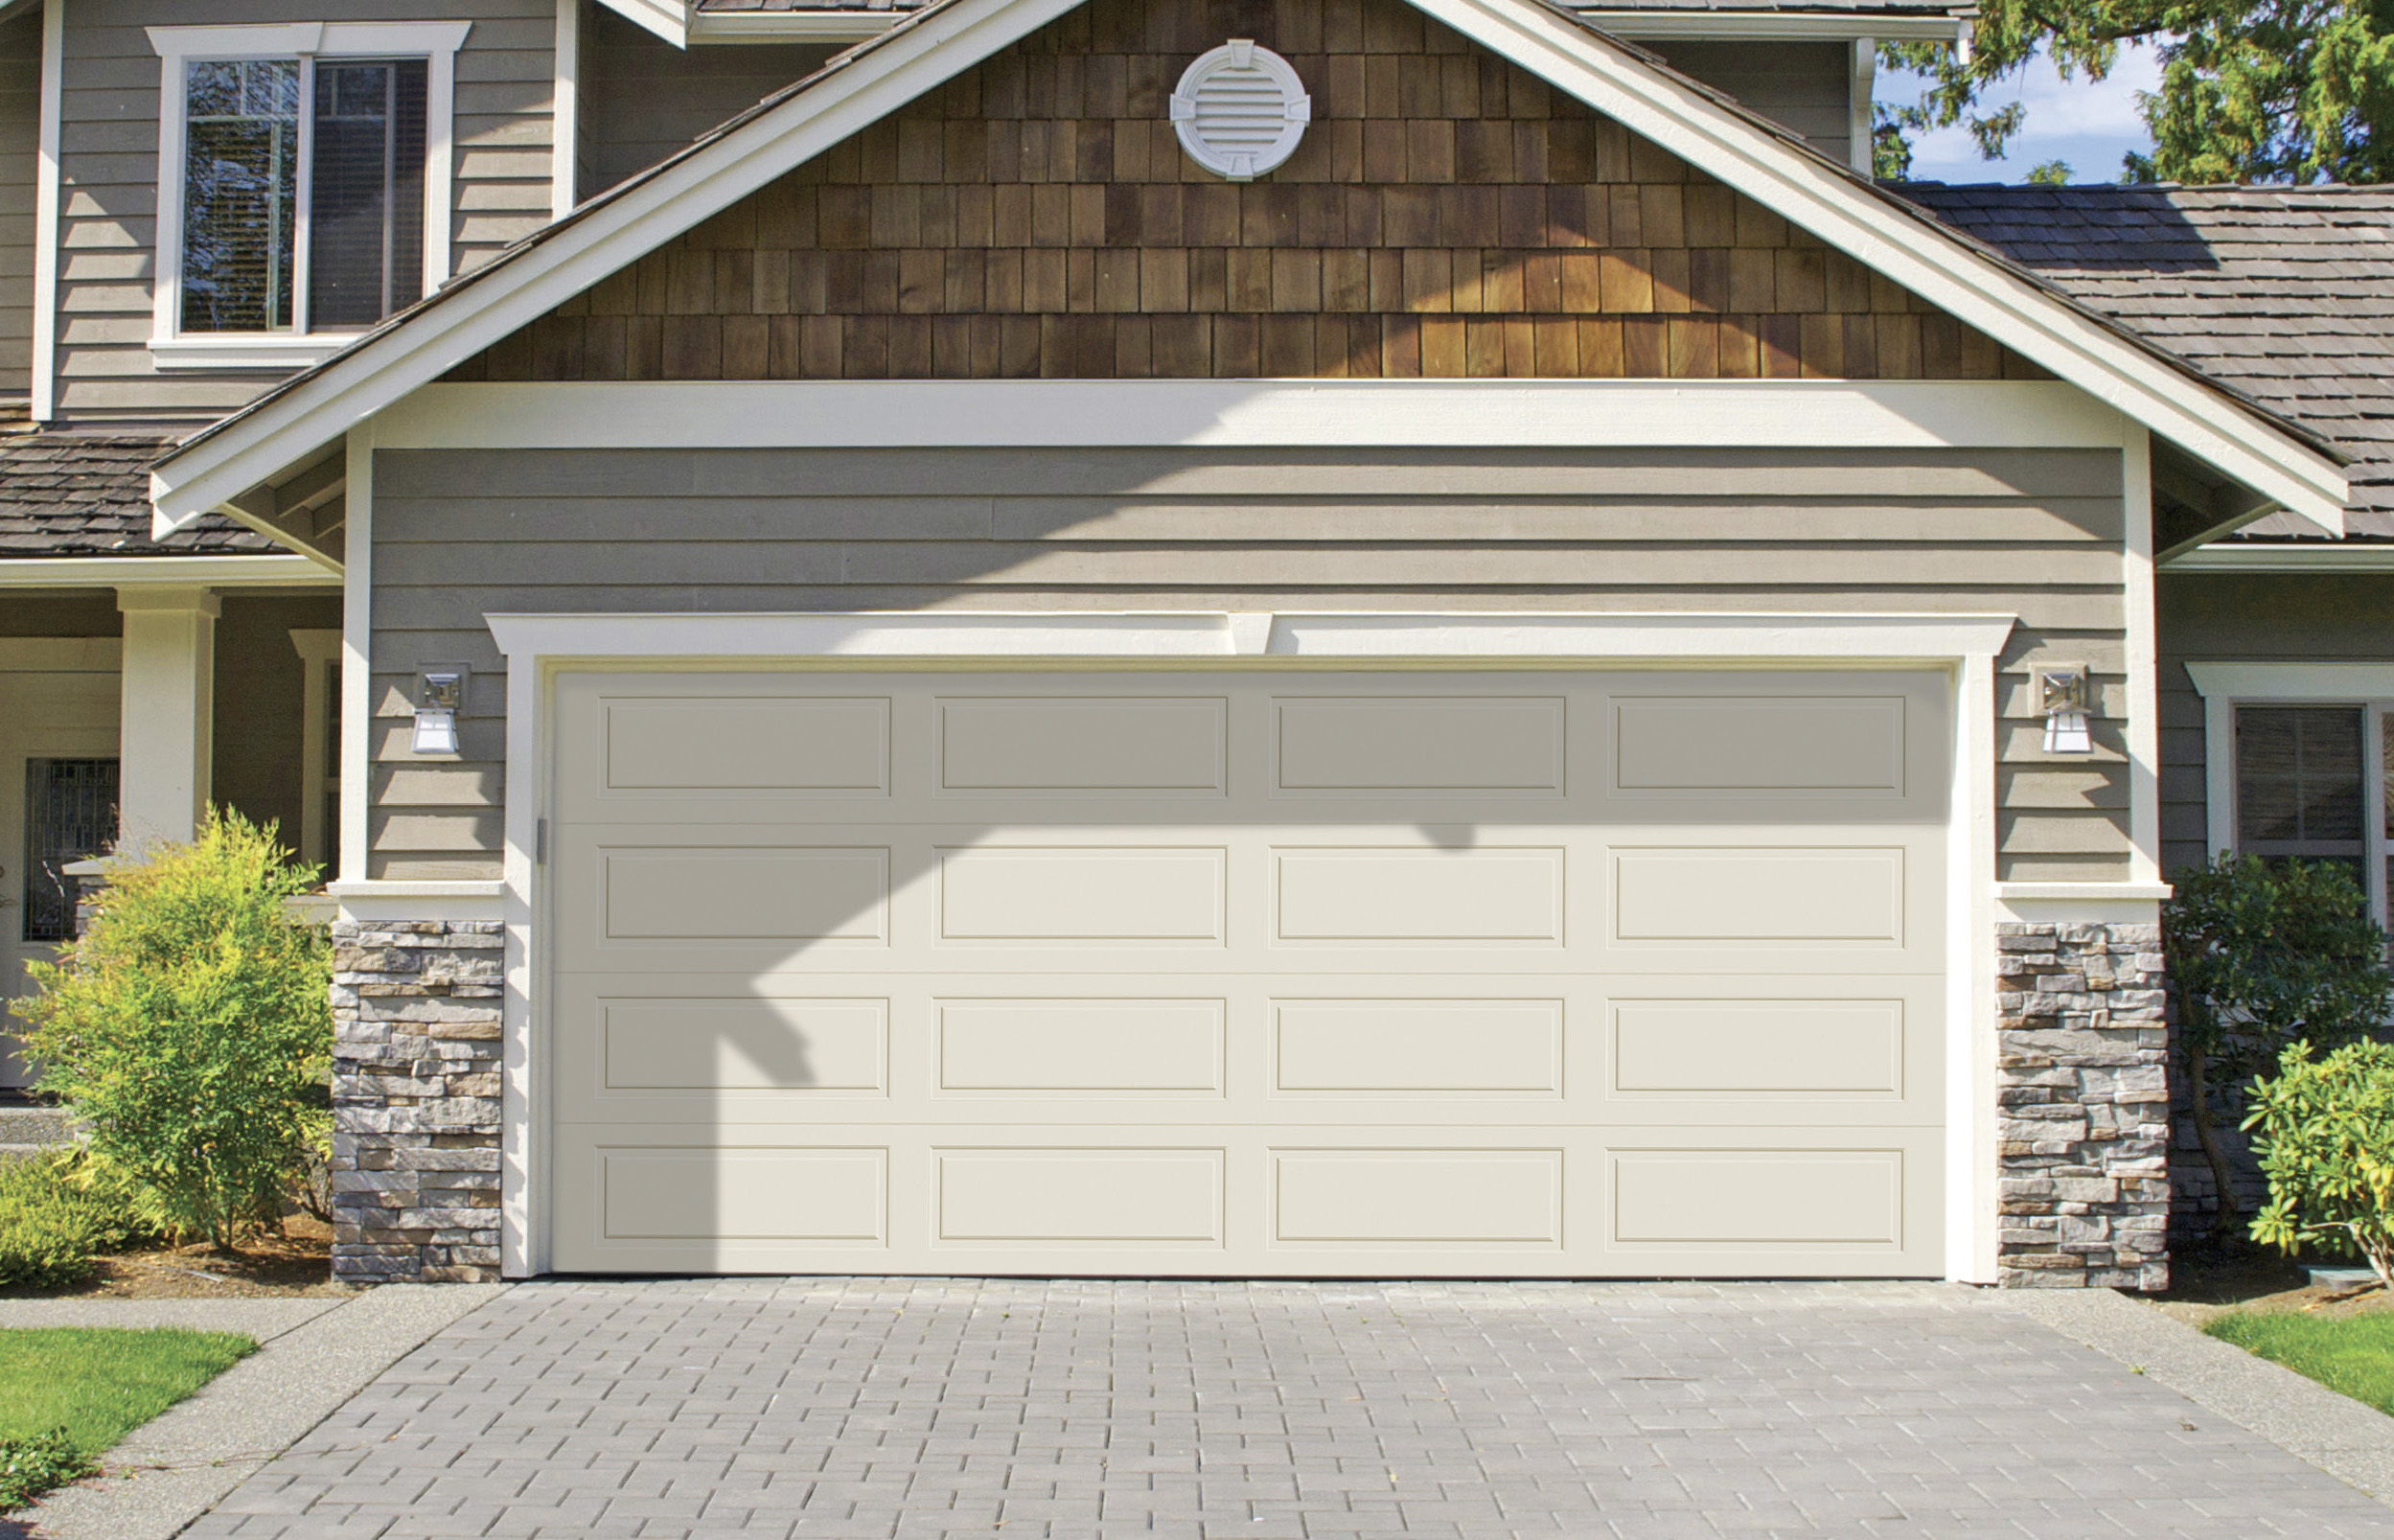 Simple Long Panel Garage Door for Large Space